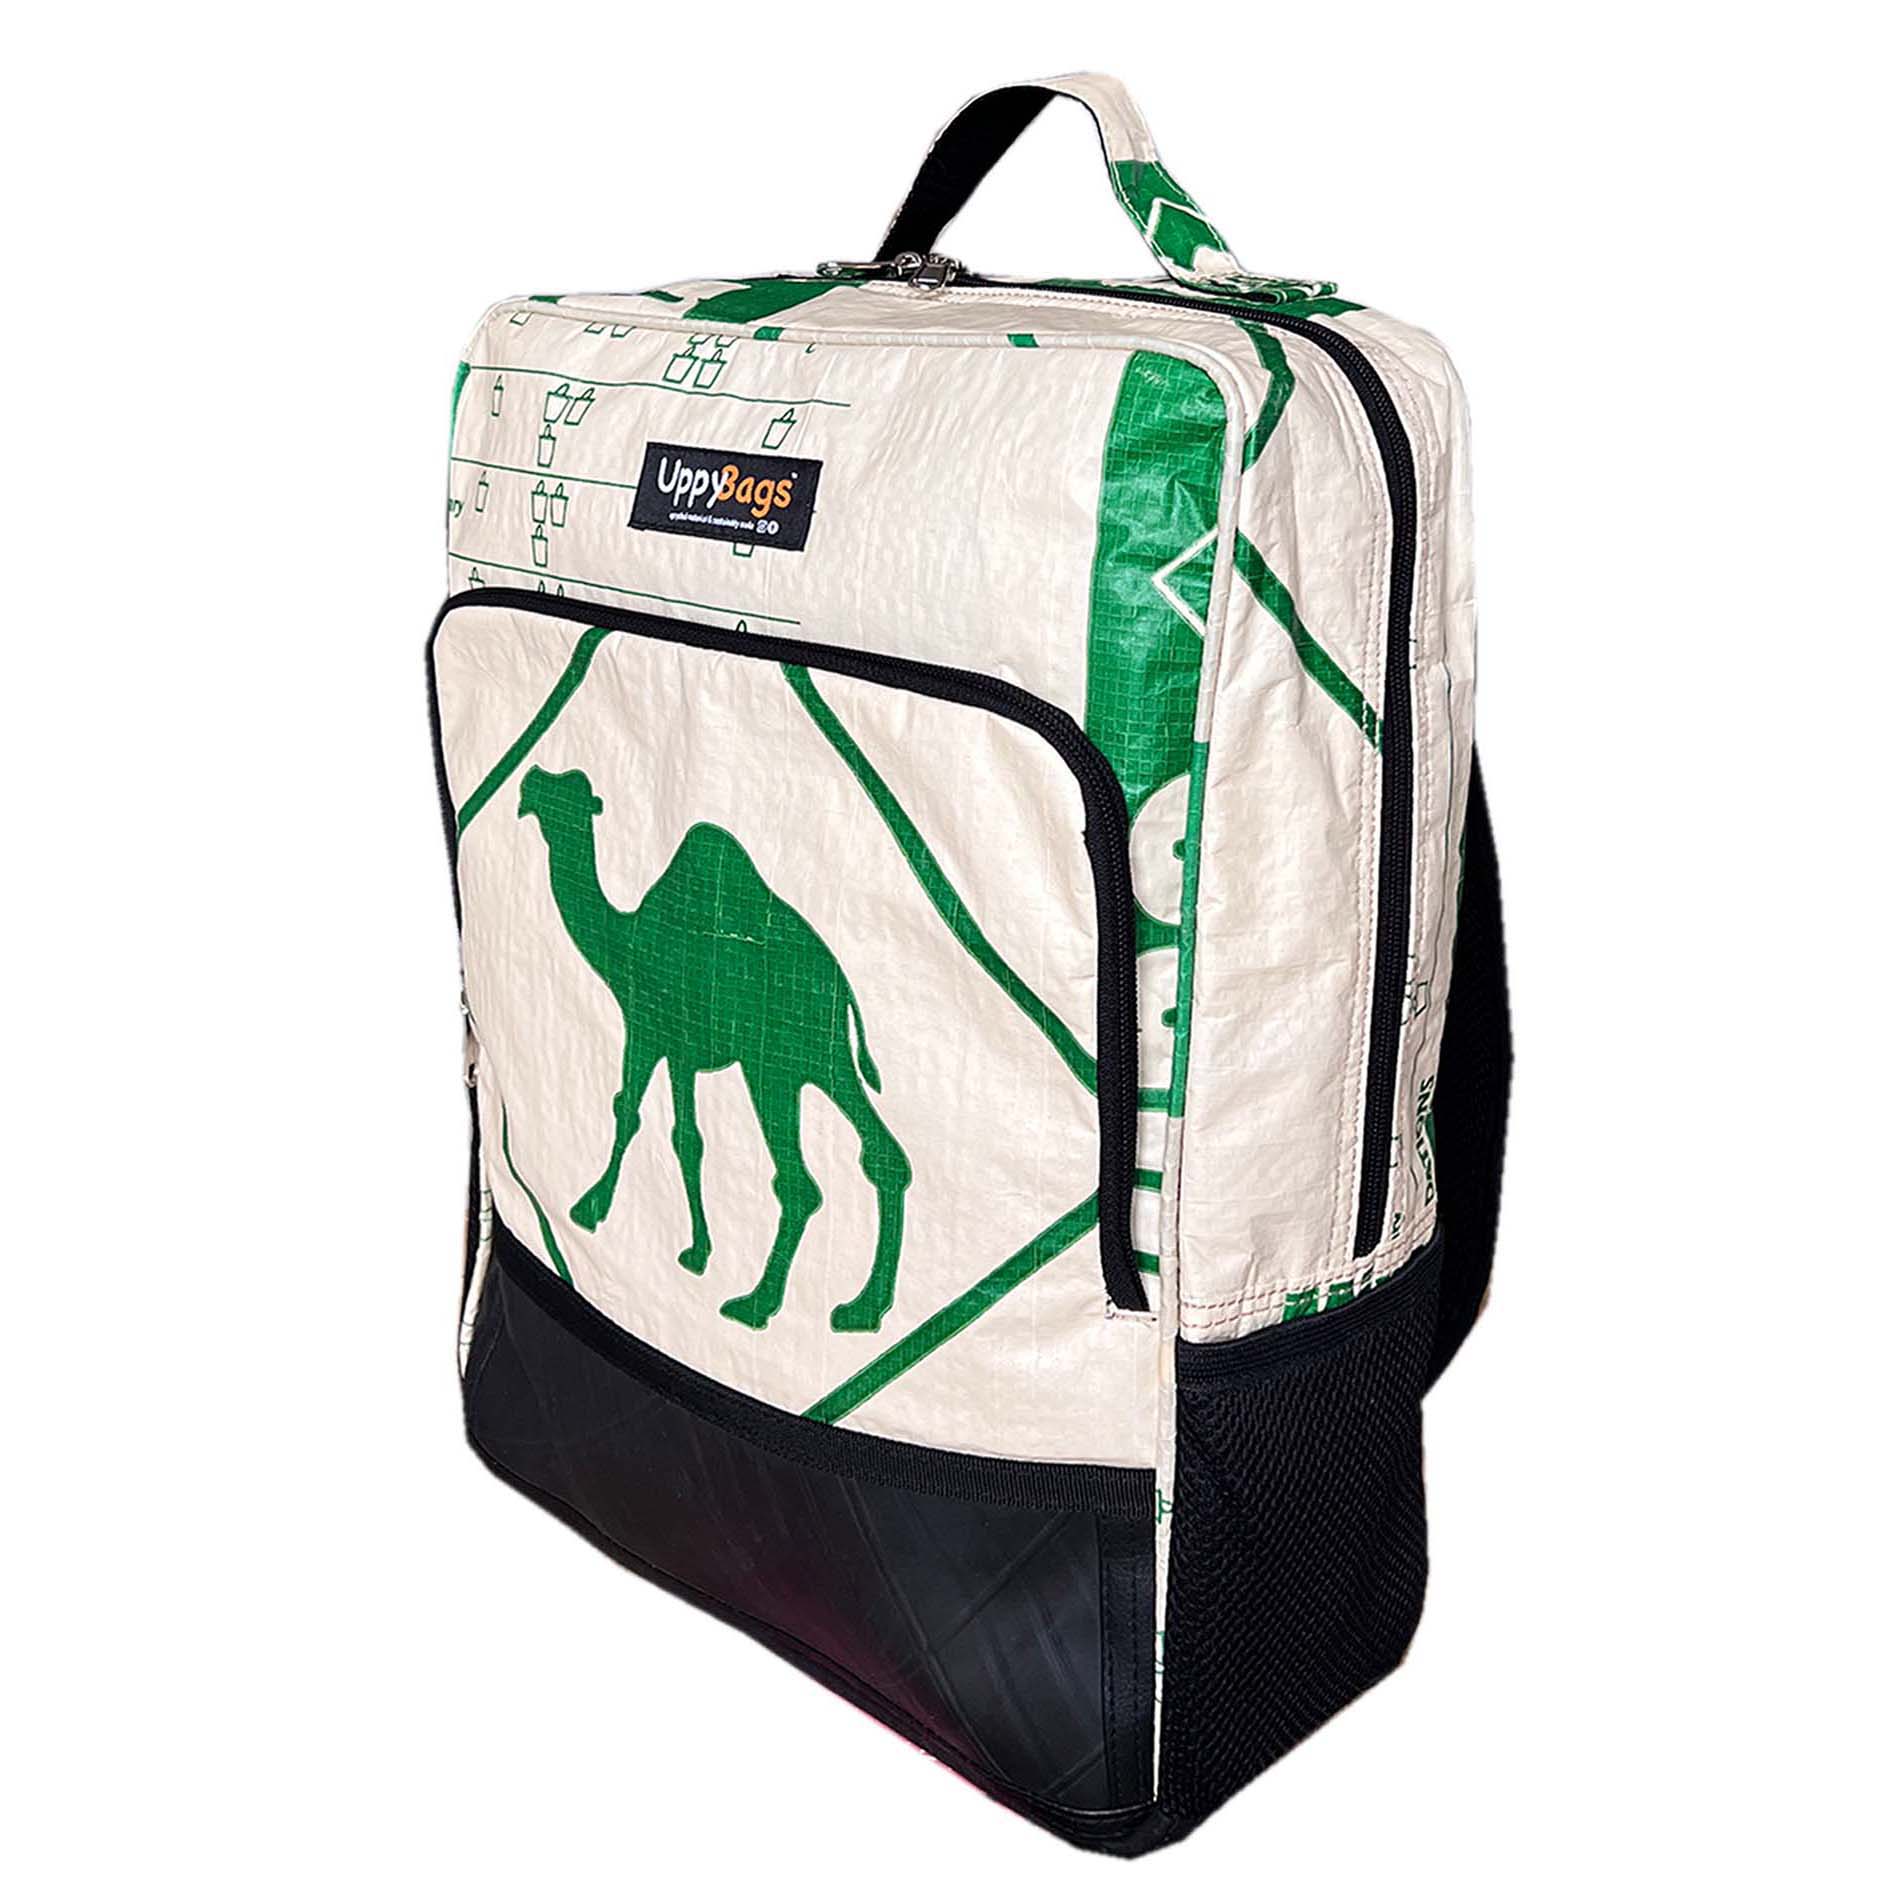 Laptop backpack with animal prints + car tyre bottom